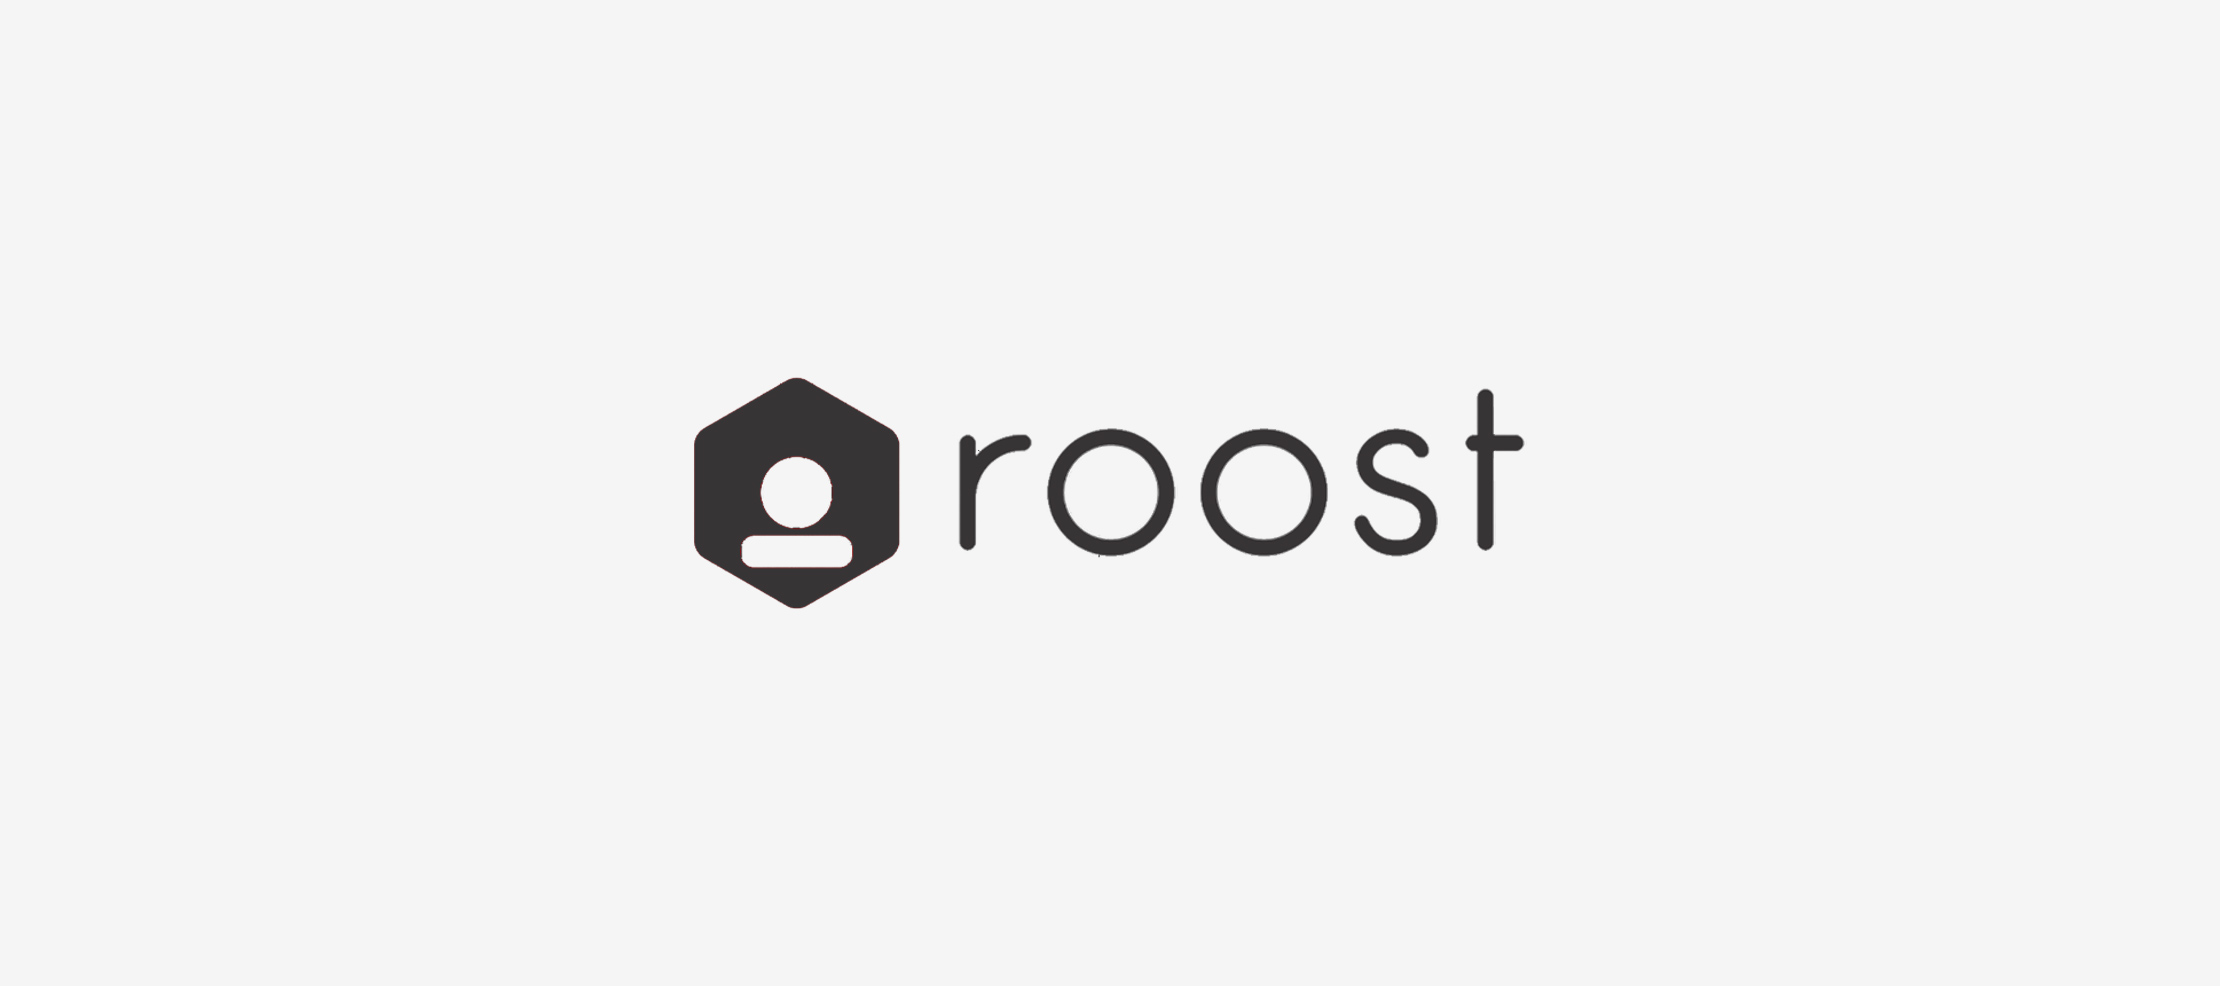 Roost Logo